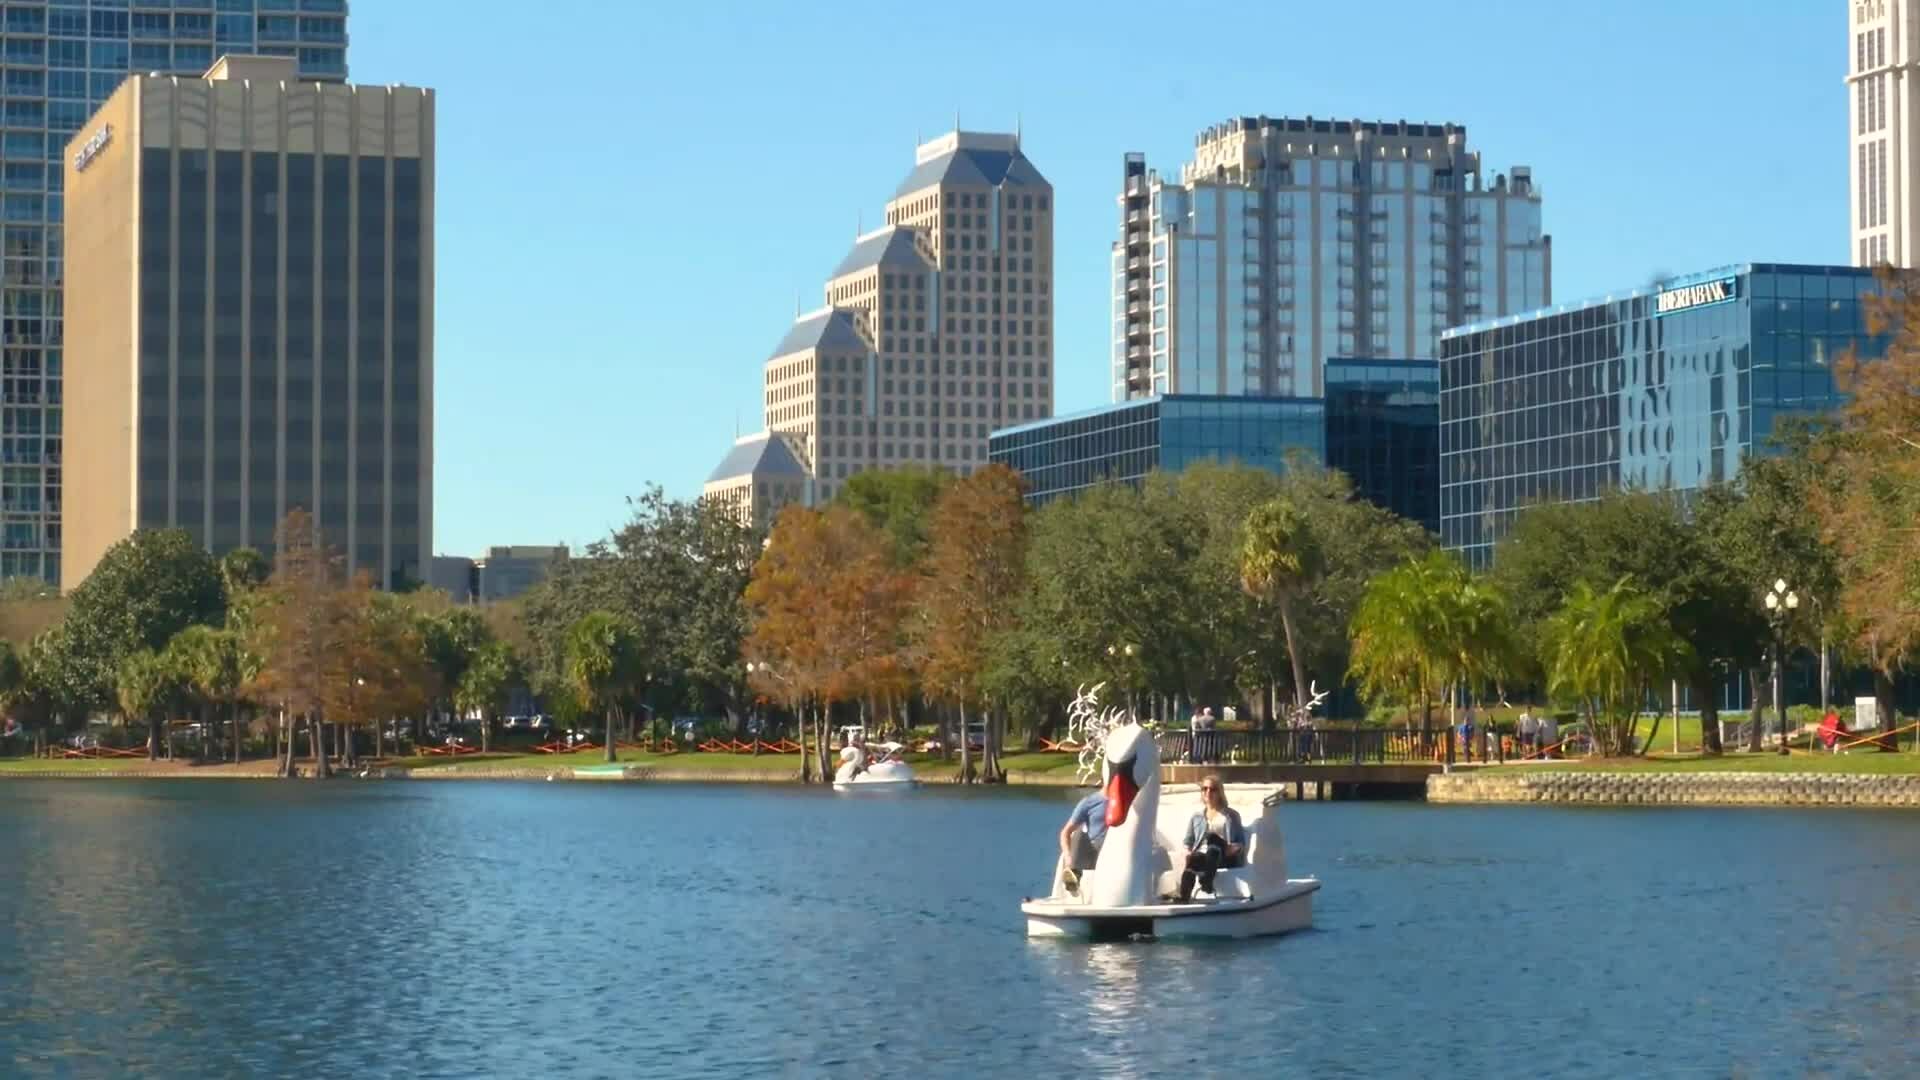 People riding on swan boats at Lake Eola Park in downtown Orlando